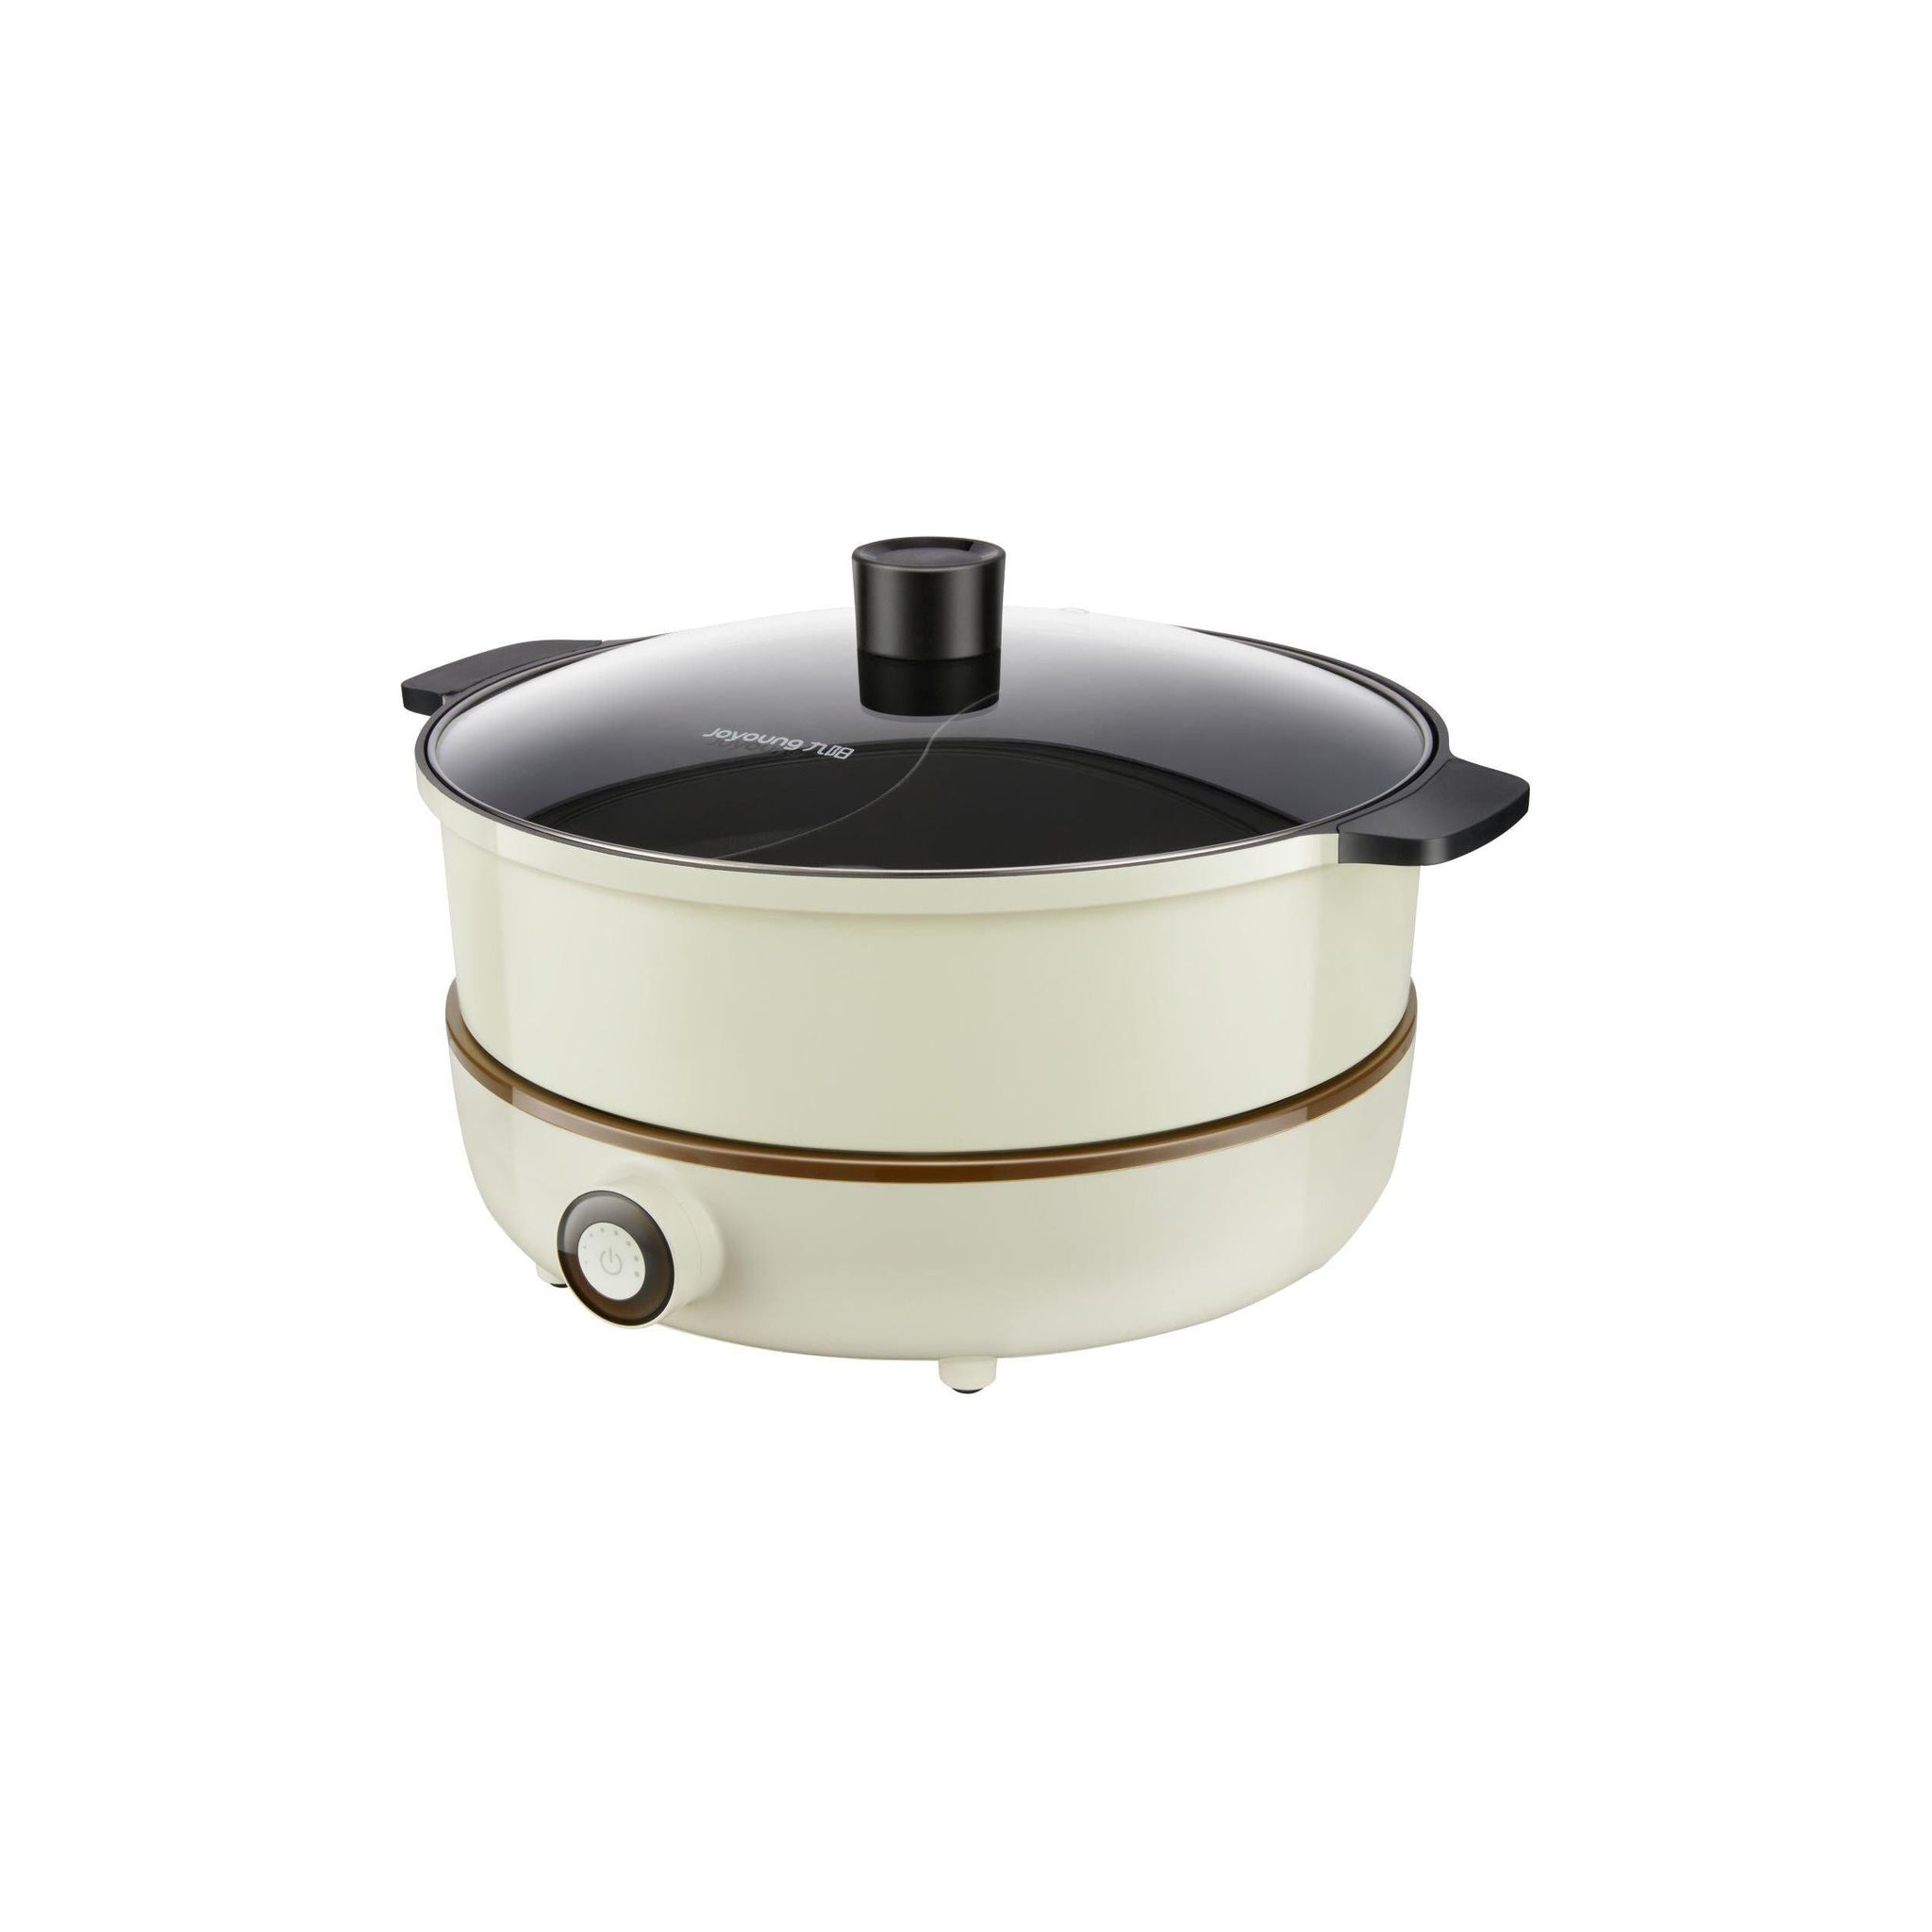 Joyoung Divided Hotpot With Induction Cooker | Shopjoyoung